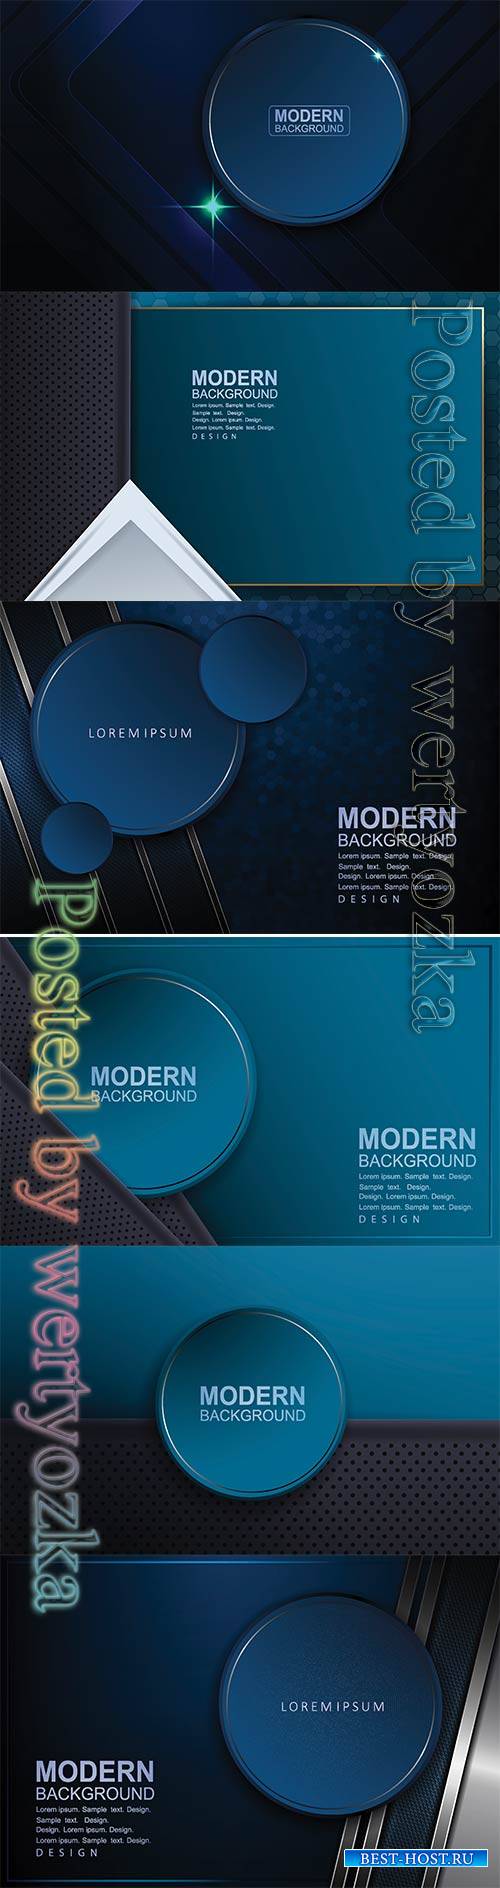 Abstract luxury vector backgrounds with different shapes # 3